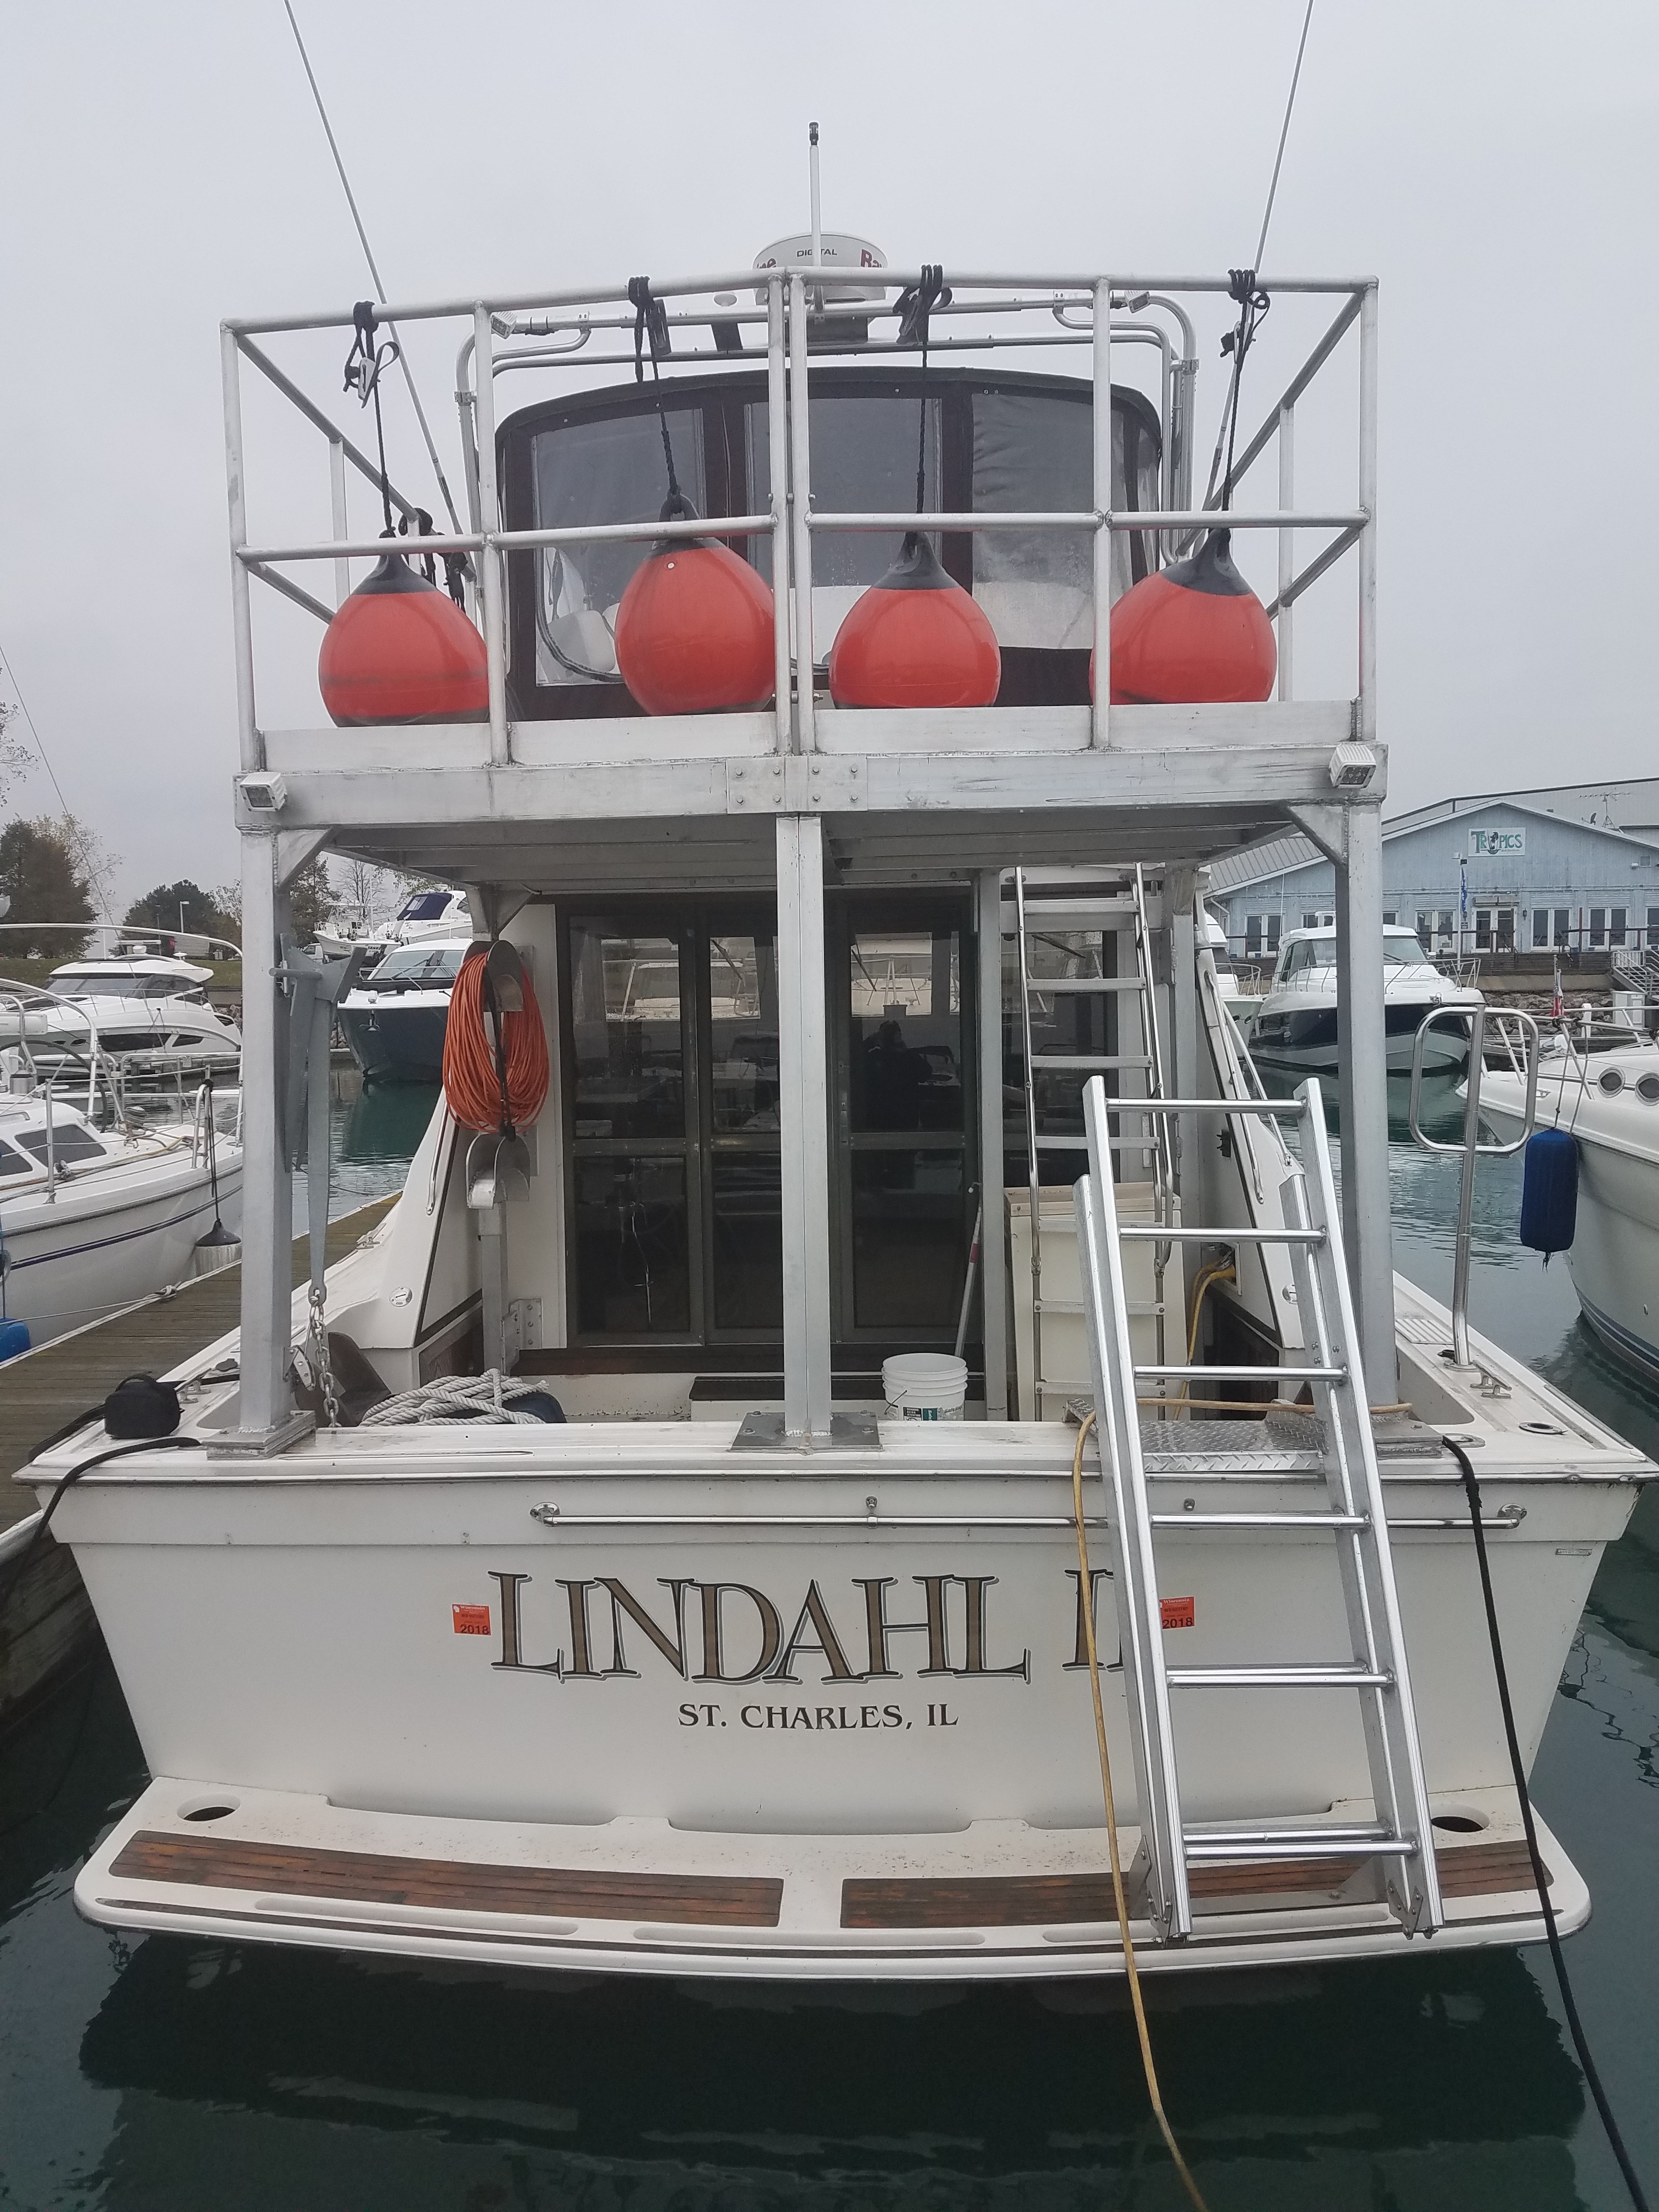 New 40' dive boat equipped with custom work platform